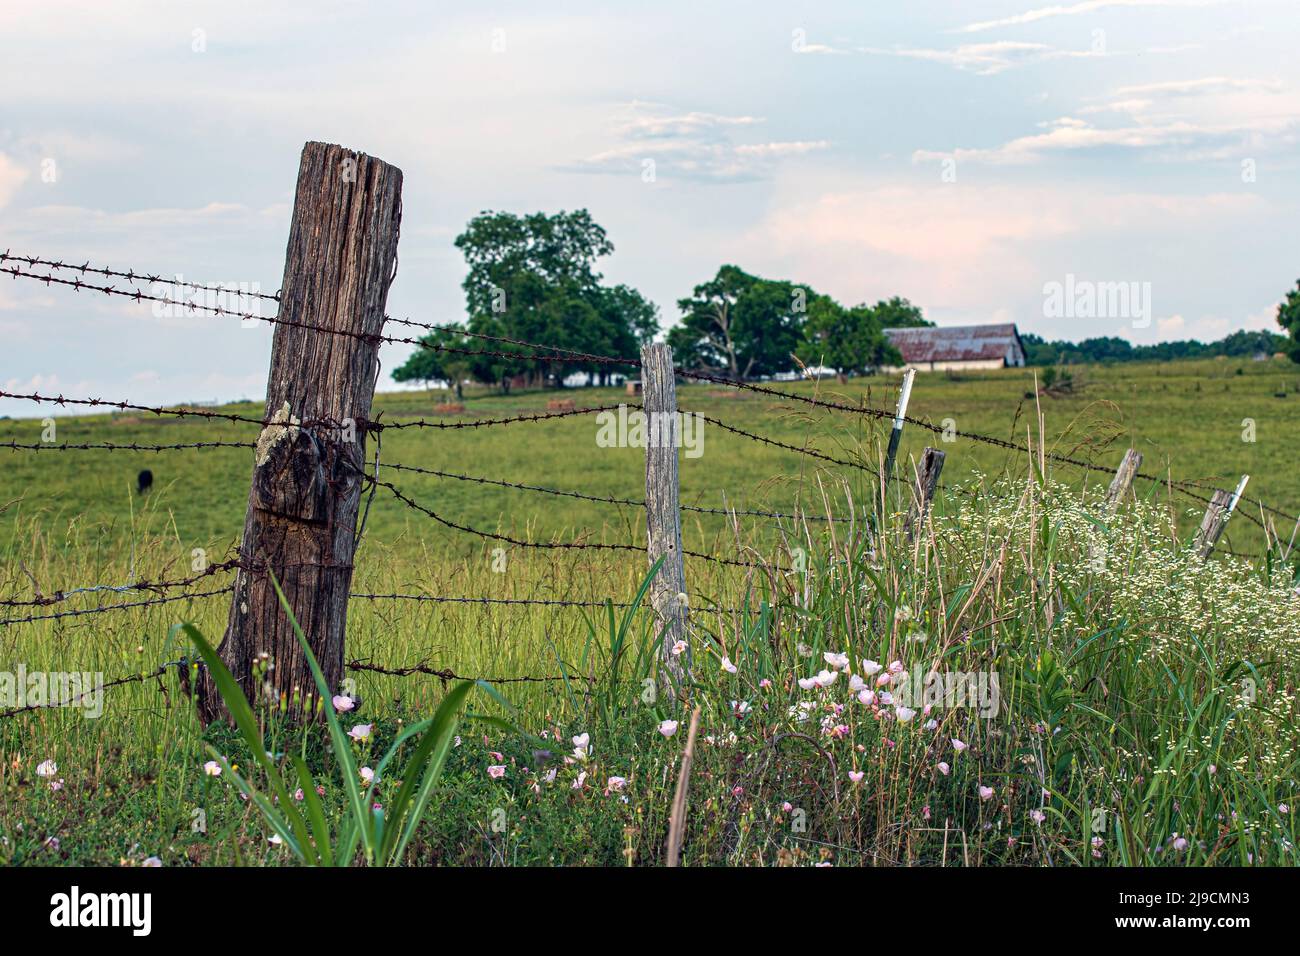 Wooden fence post of a barbed wire fence with spring wild flowers in bloom in the foreground and pasture and barn in the background. Stock Photo